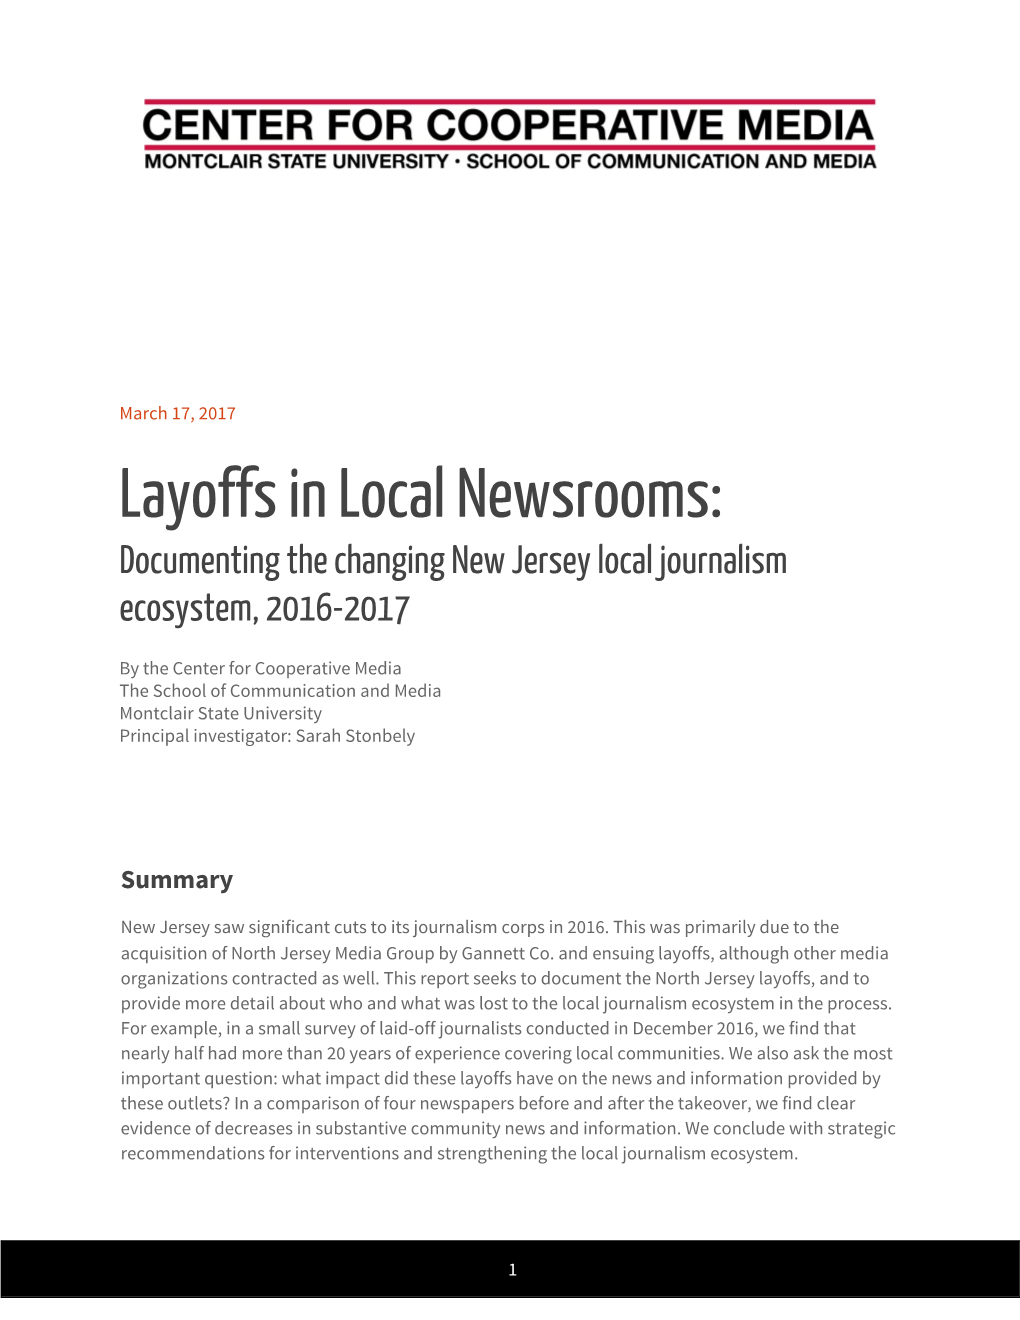 Layoffs in Local Newsrooms: Documenting the Changing New Jersey Local Journalism Ecosystem, 2016-2017